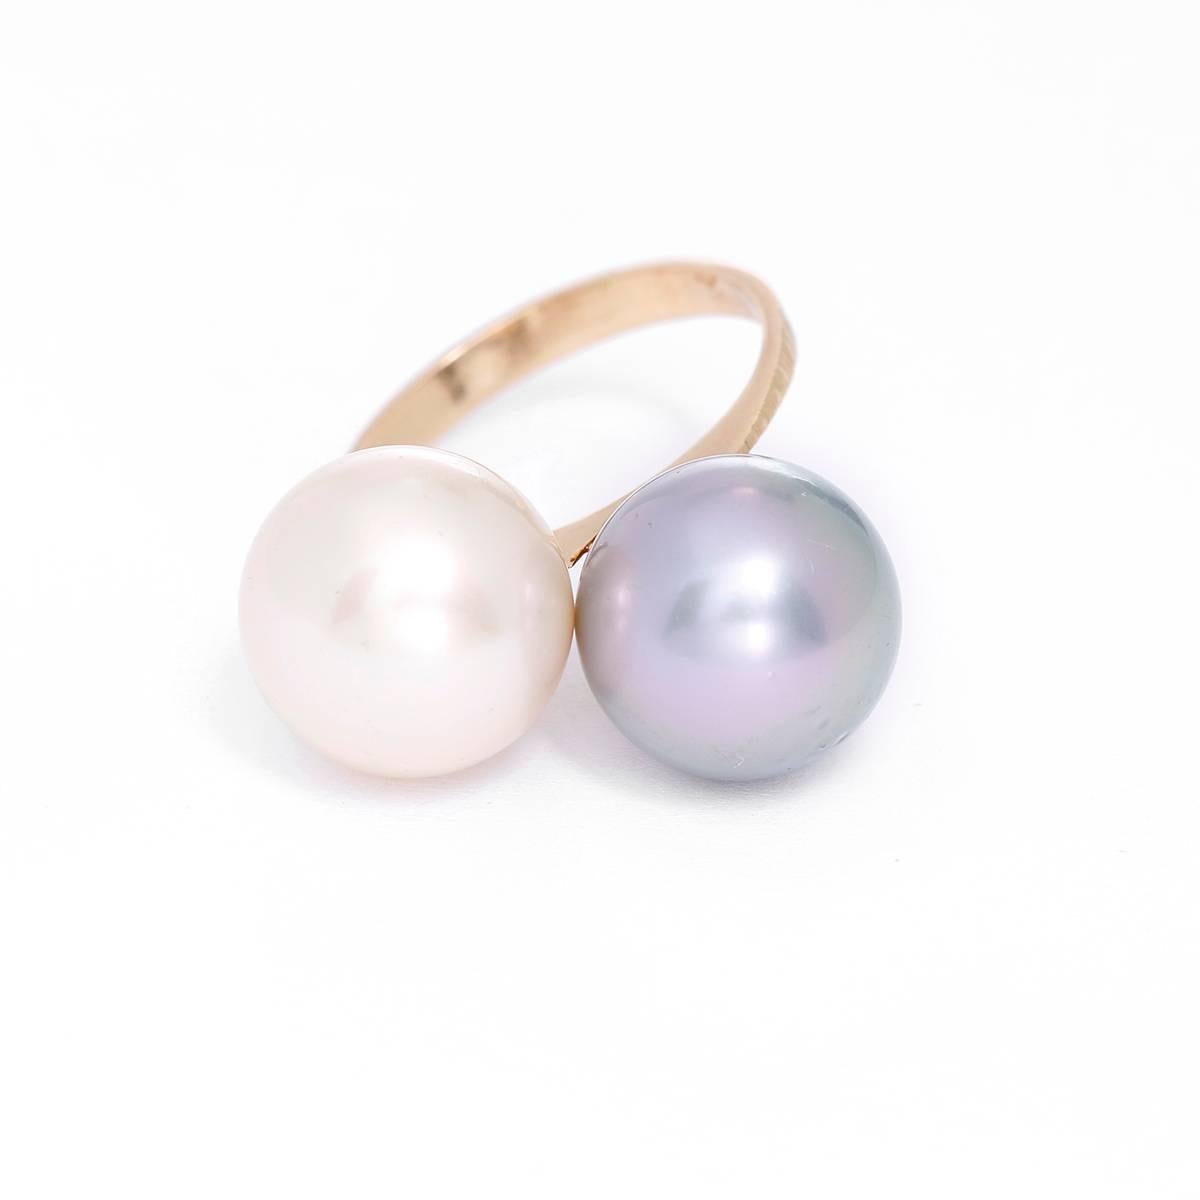 This beautiful ring features one white pearl and one gray pearl apx. 10 mm each. This ring is a stunning statement and is apx. a size 7 and can be sized.